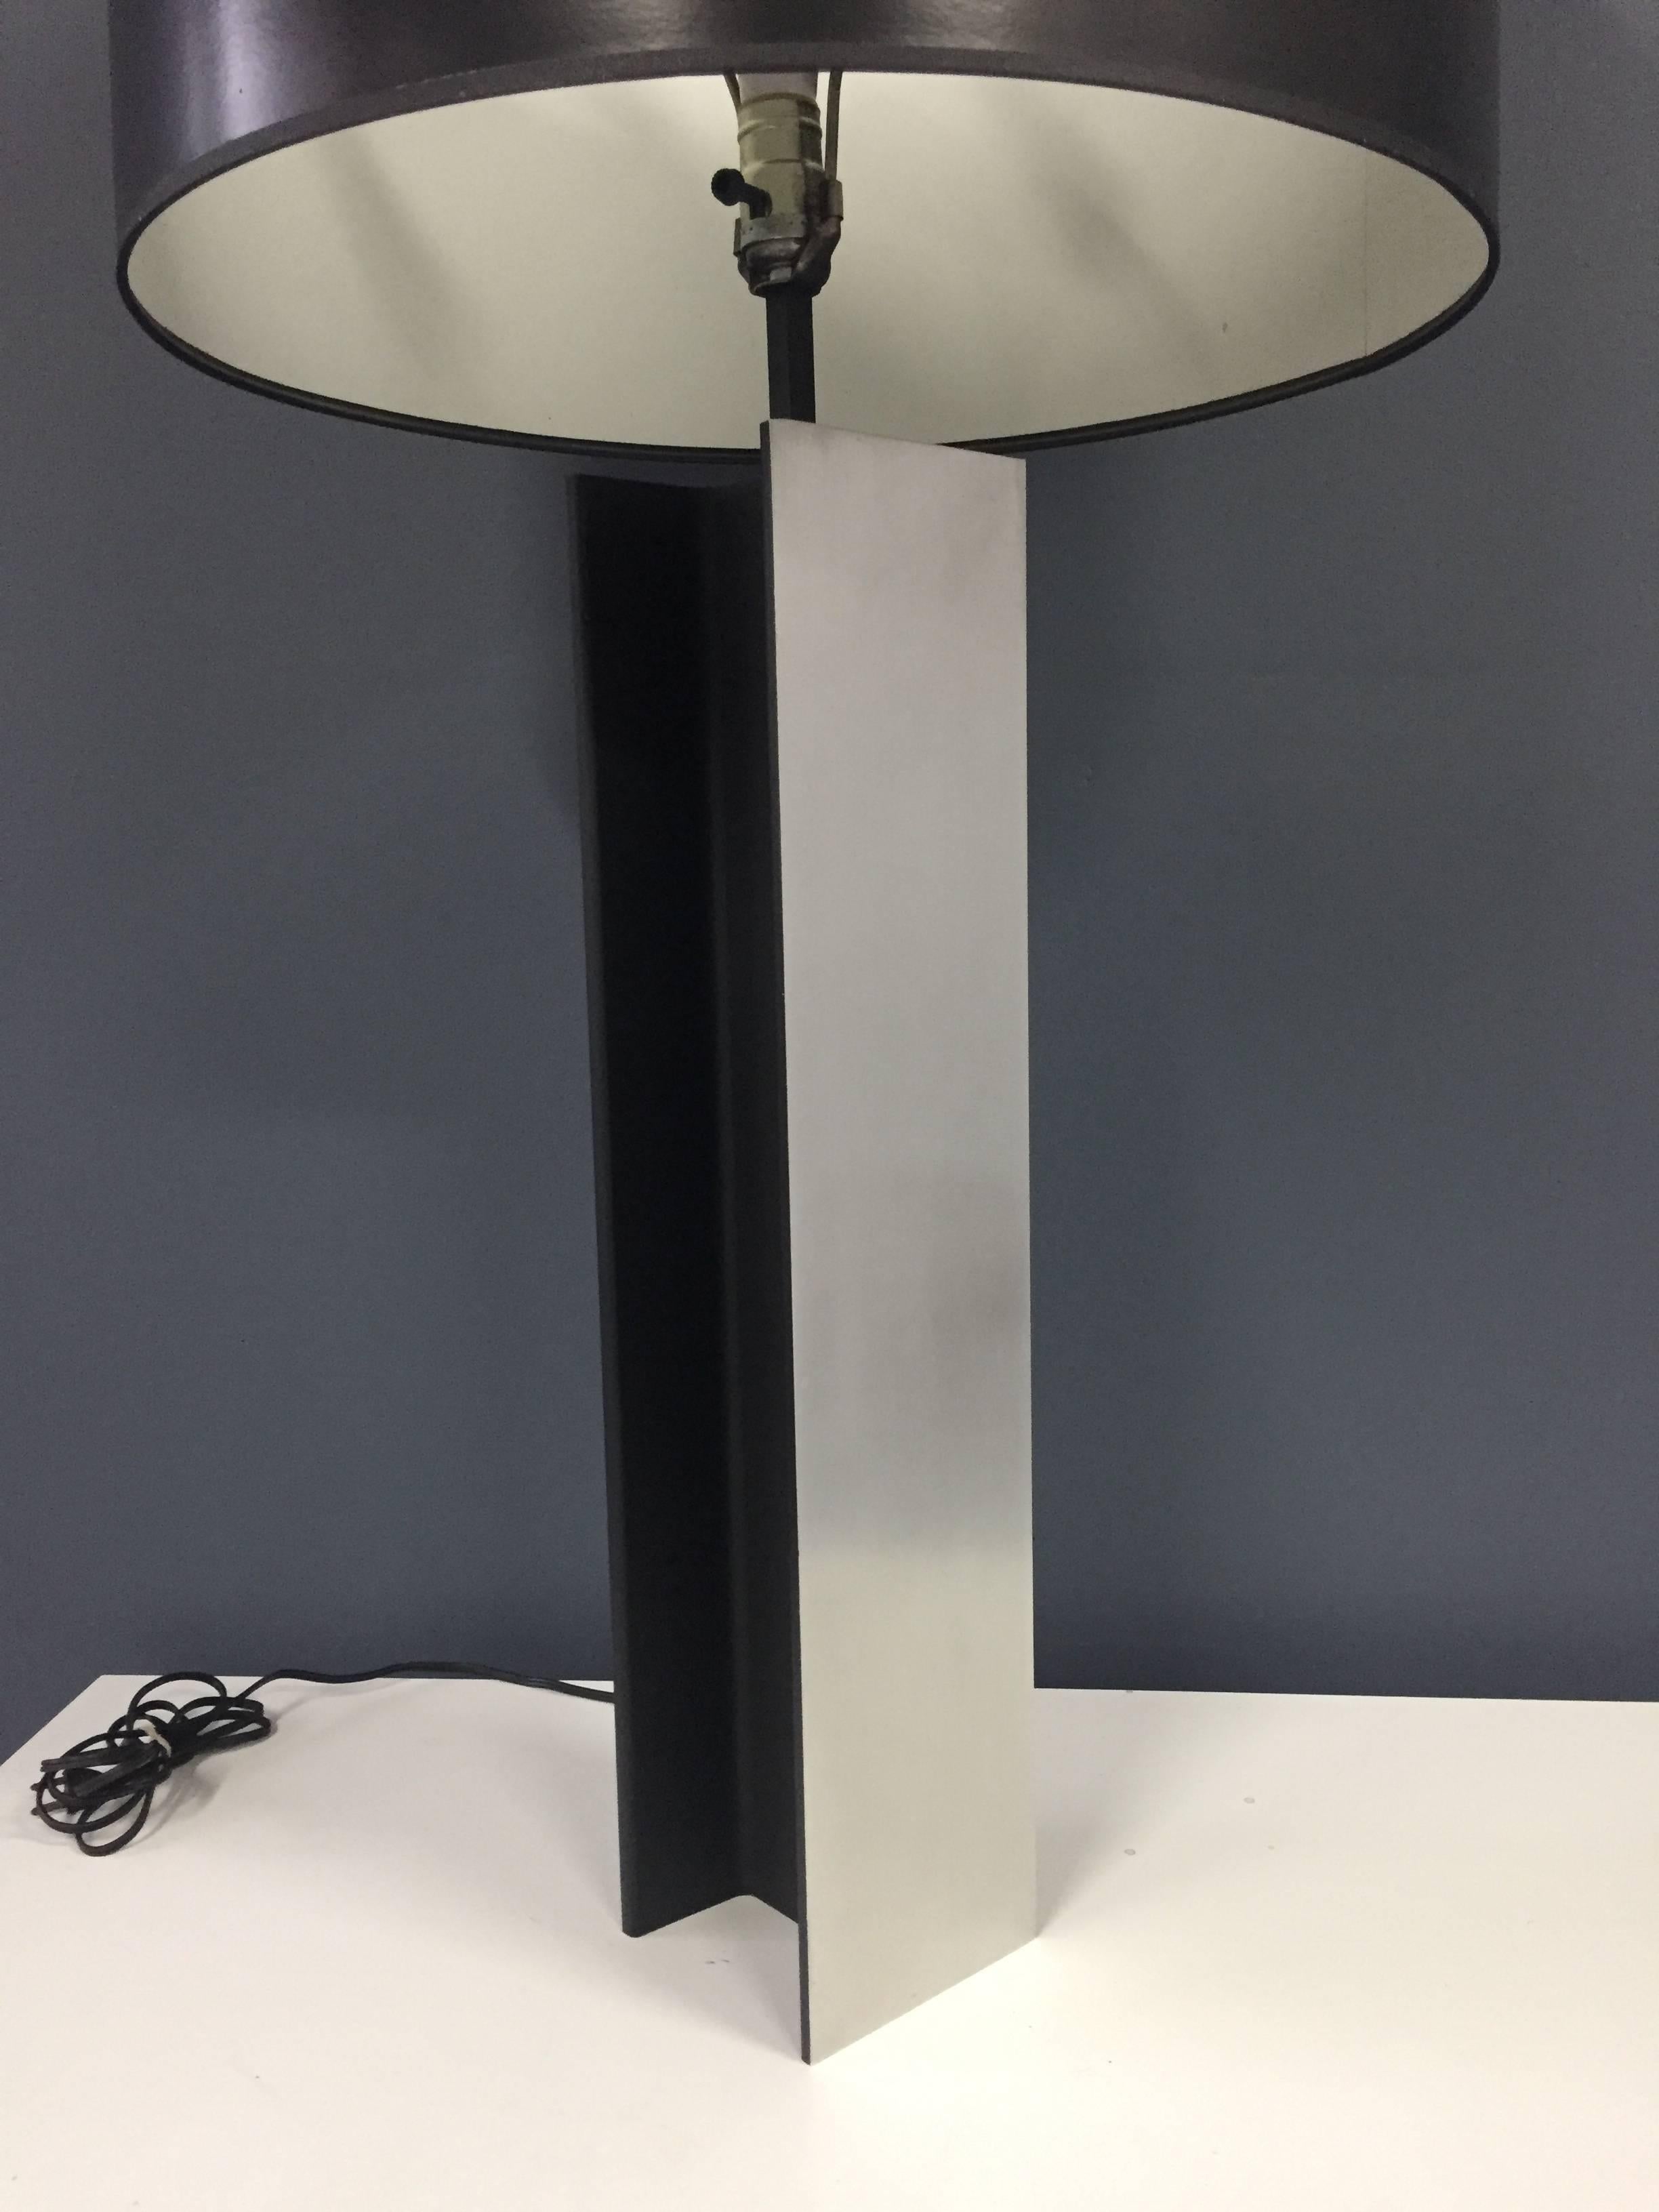 A substantial Laurel Lamp Company steel and black enameled steel I beam table lamp. This architectural lamp will add a significant impression to any room it's placed in.